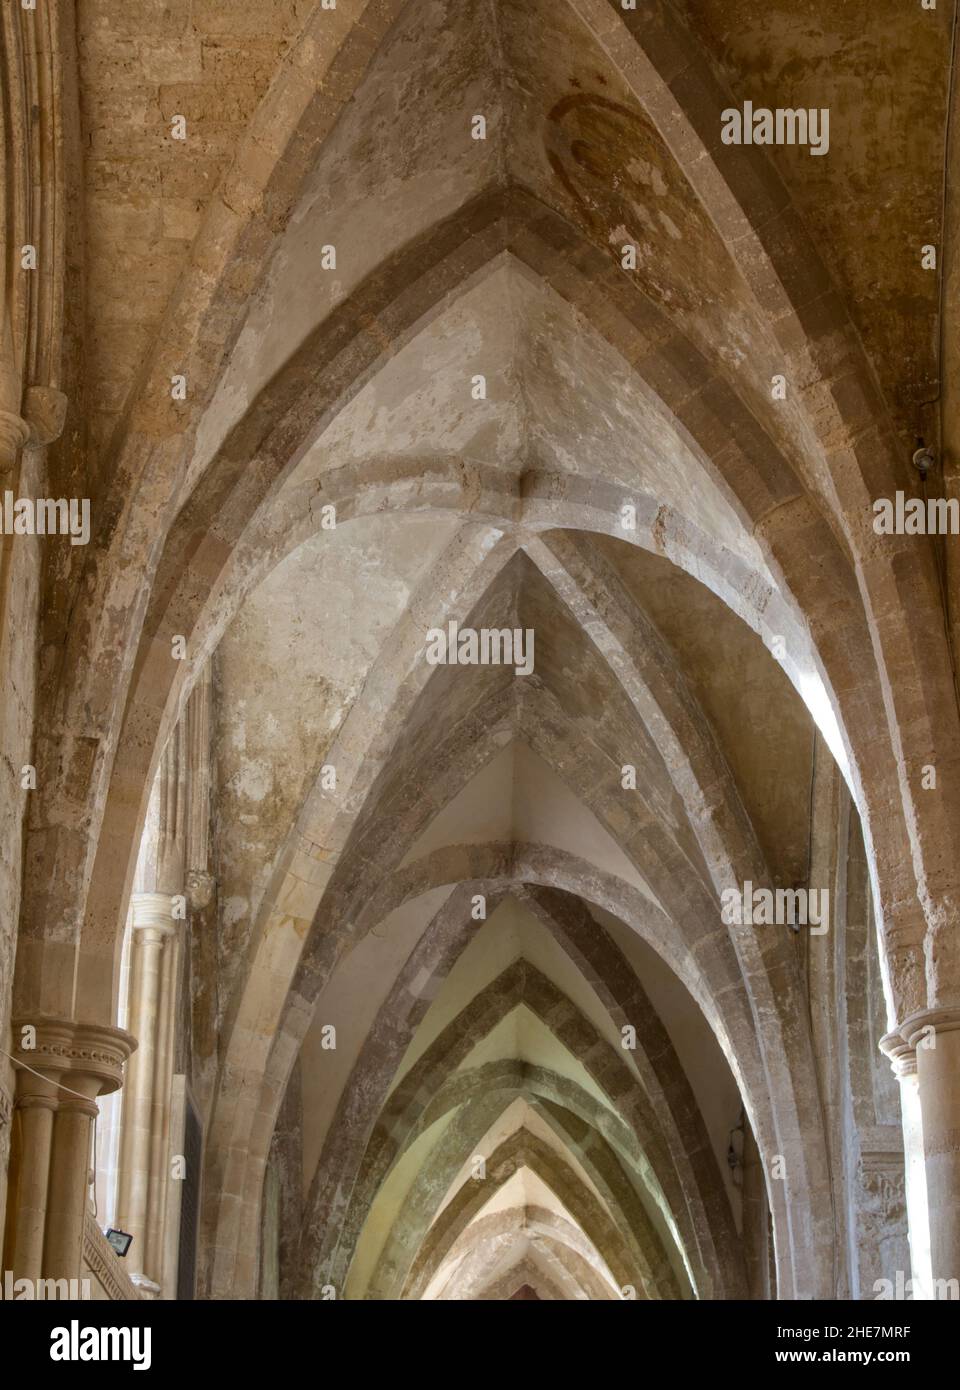 Stone Quadripartite Rib, Ribbed Vault Roof, Arches And Arch Windows, Christchurch Priory UK Stock Photo